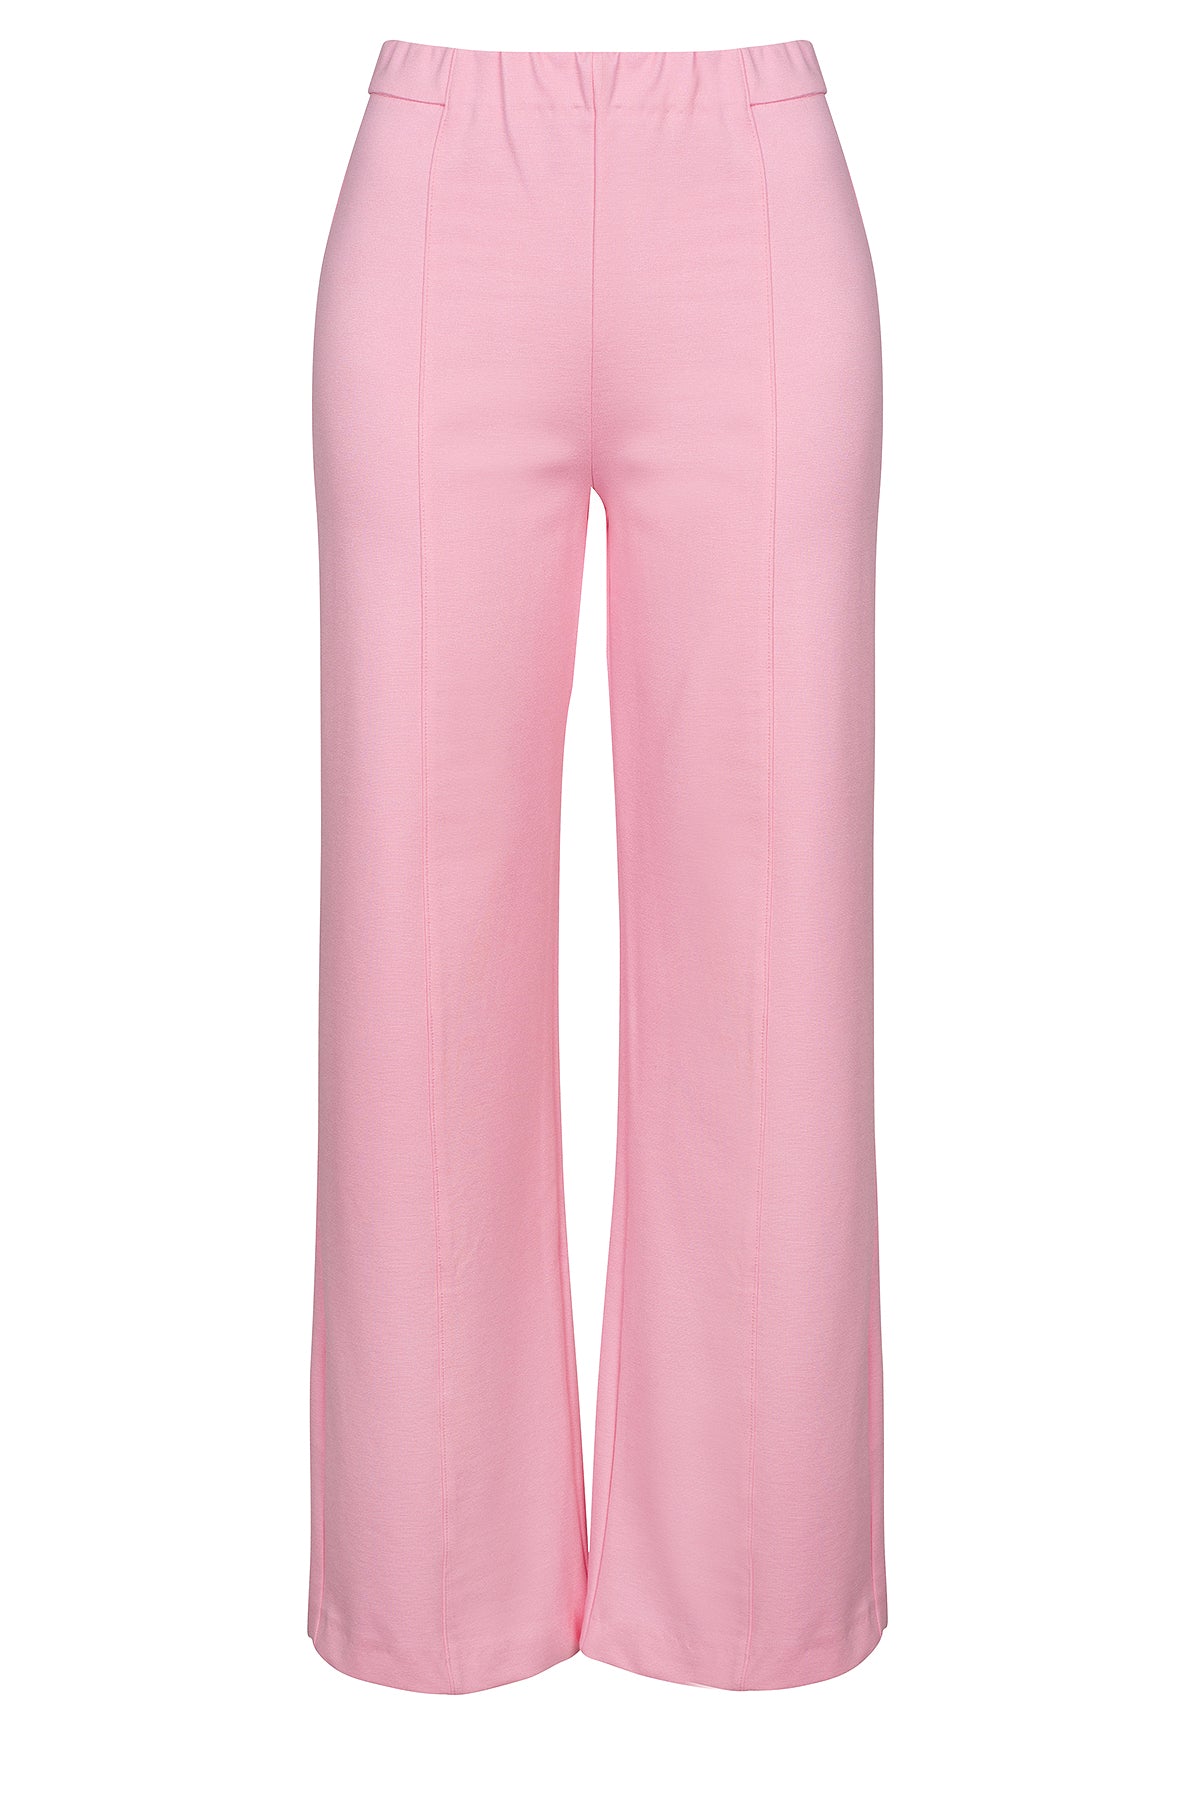 LUXZUZ // ONE TWO Beate Pant Pant 315 Candy Pink